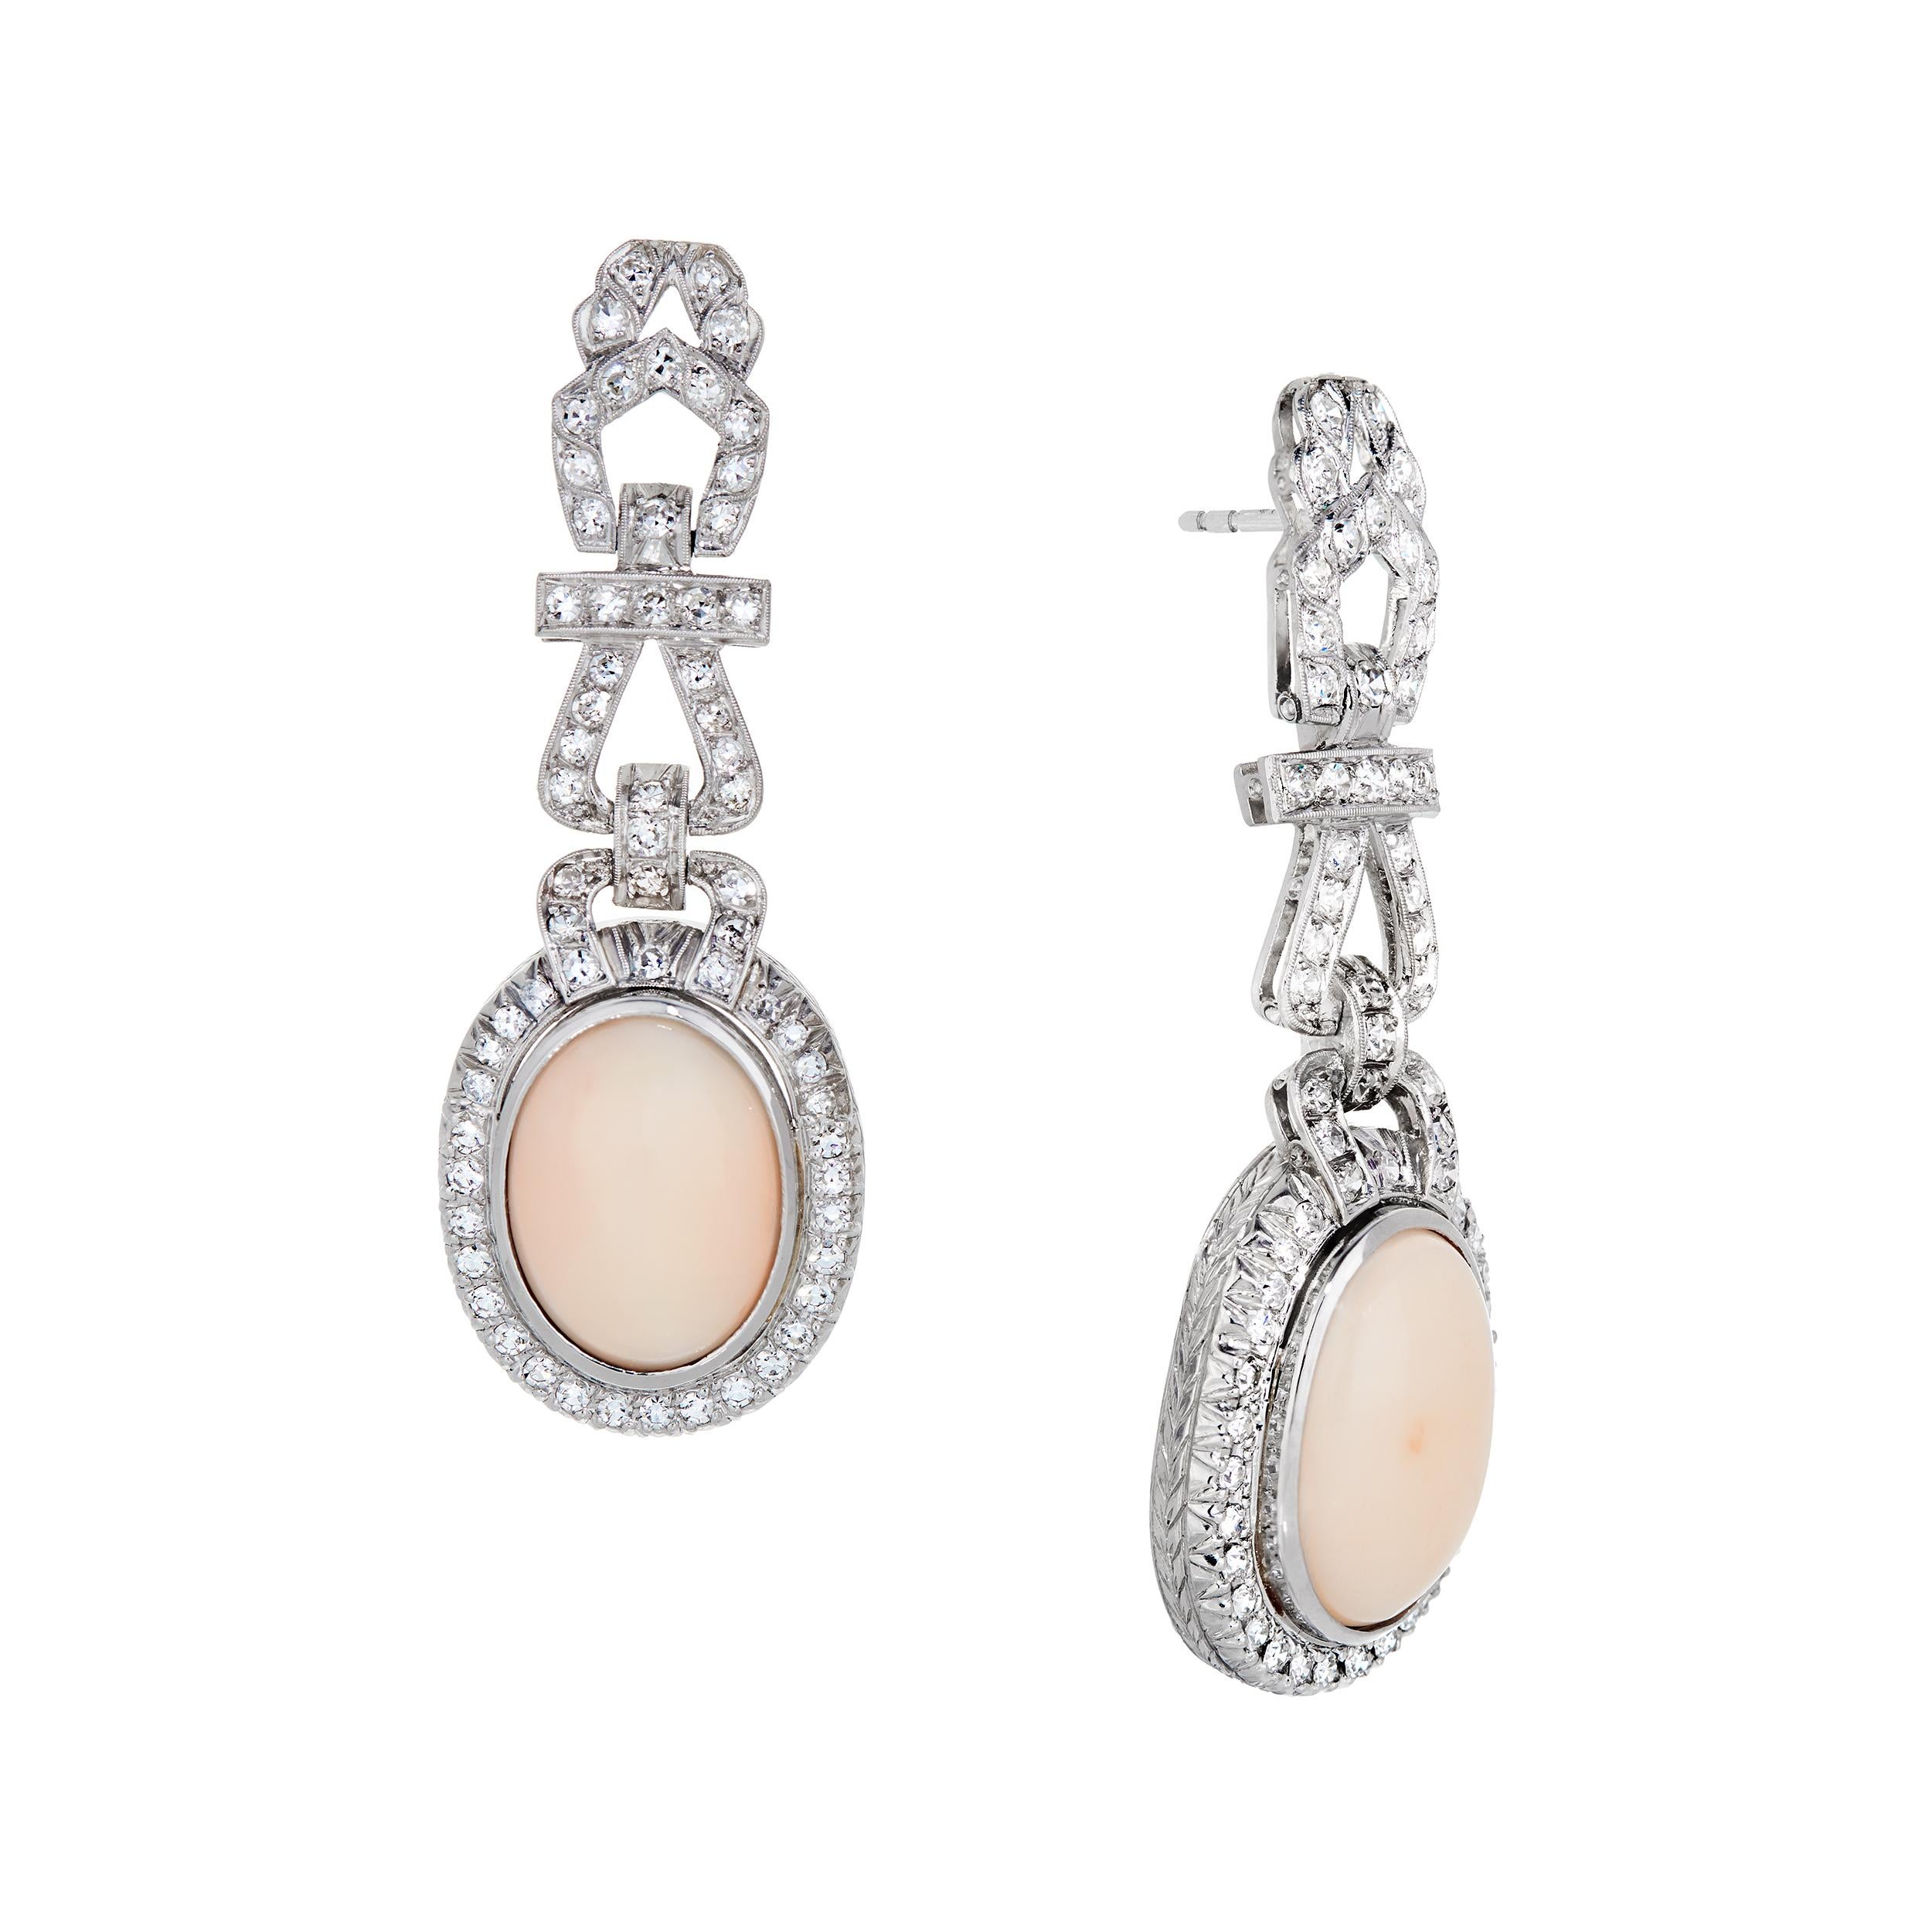 Vintage meets Vintage to create a new glorious life together!  Perfectly matched Oval Shaped Angel Skin Coral fit perfectly into this refurbished and redesigned vintage earring set in Platinum.

These Earrings coordinate perfectly with an Angel Skin